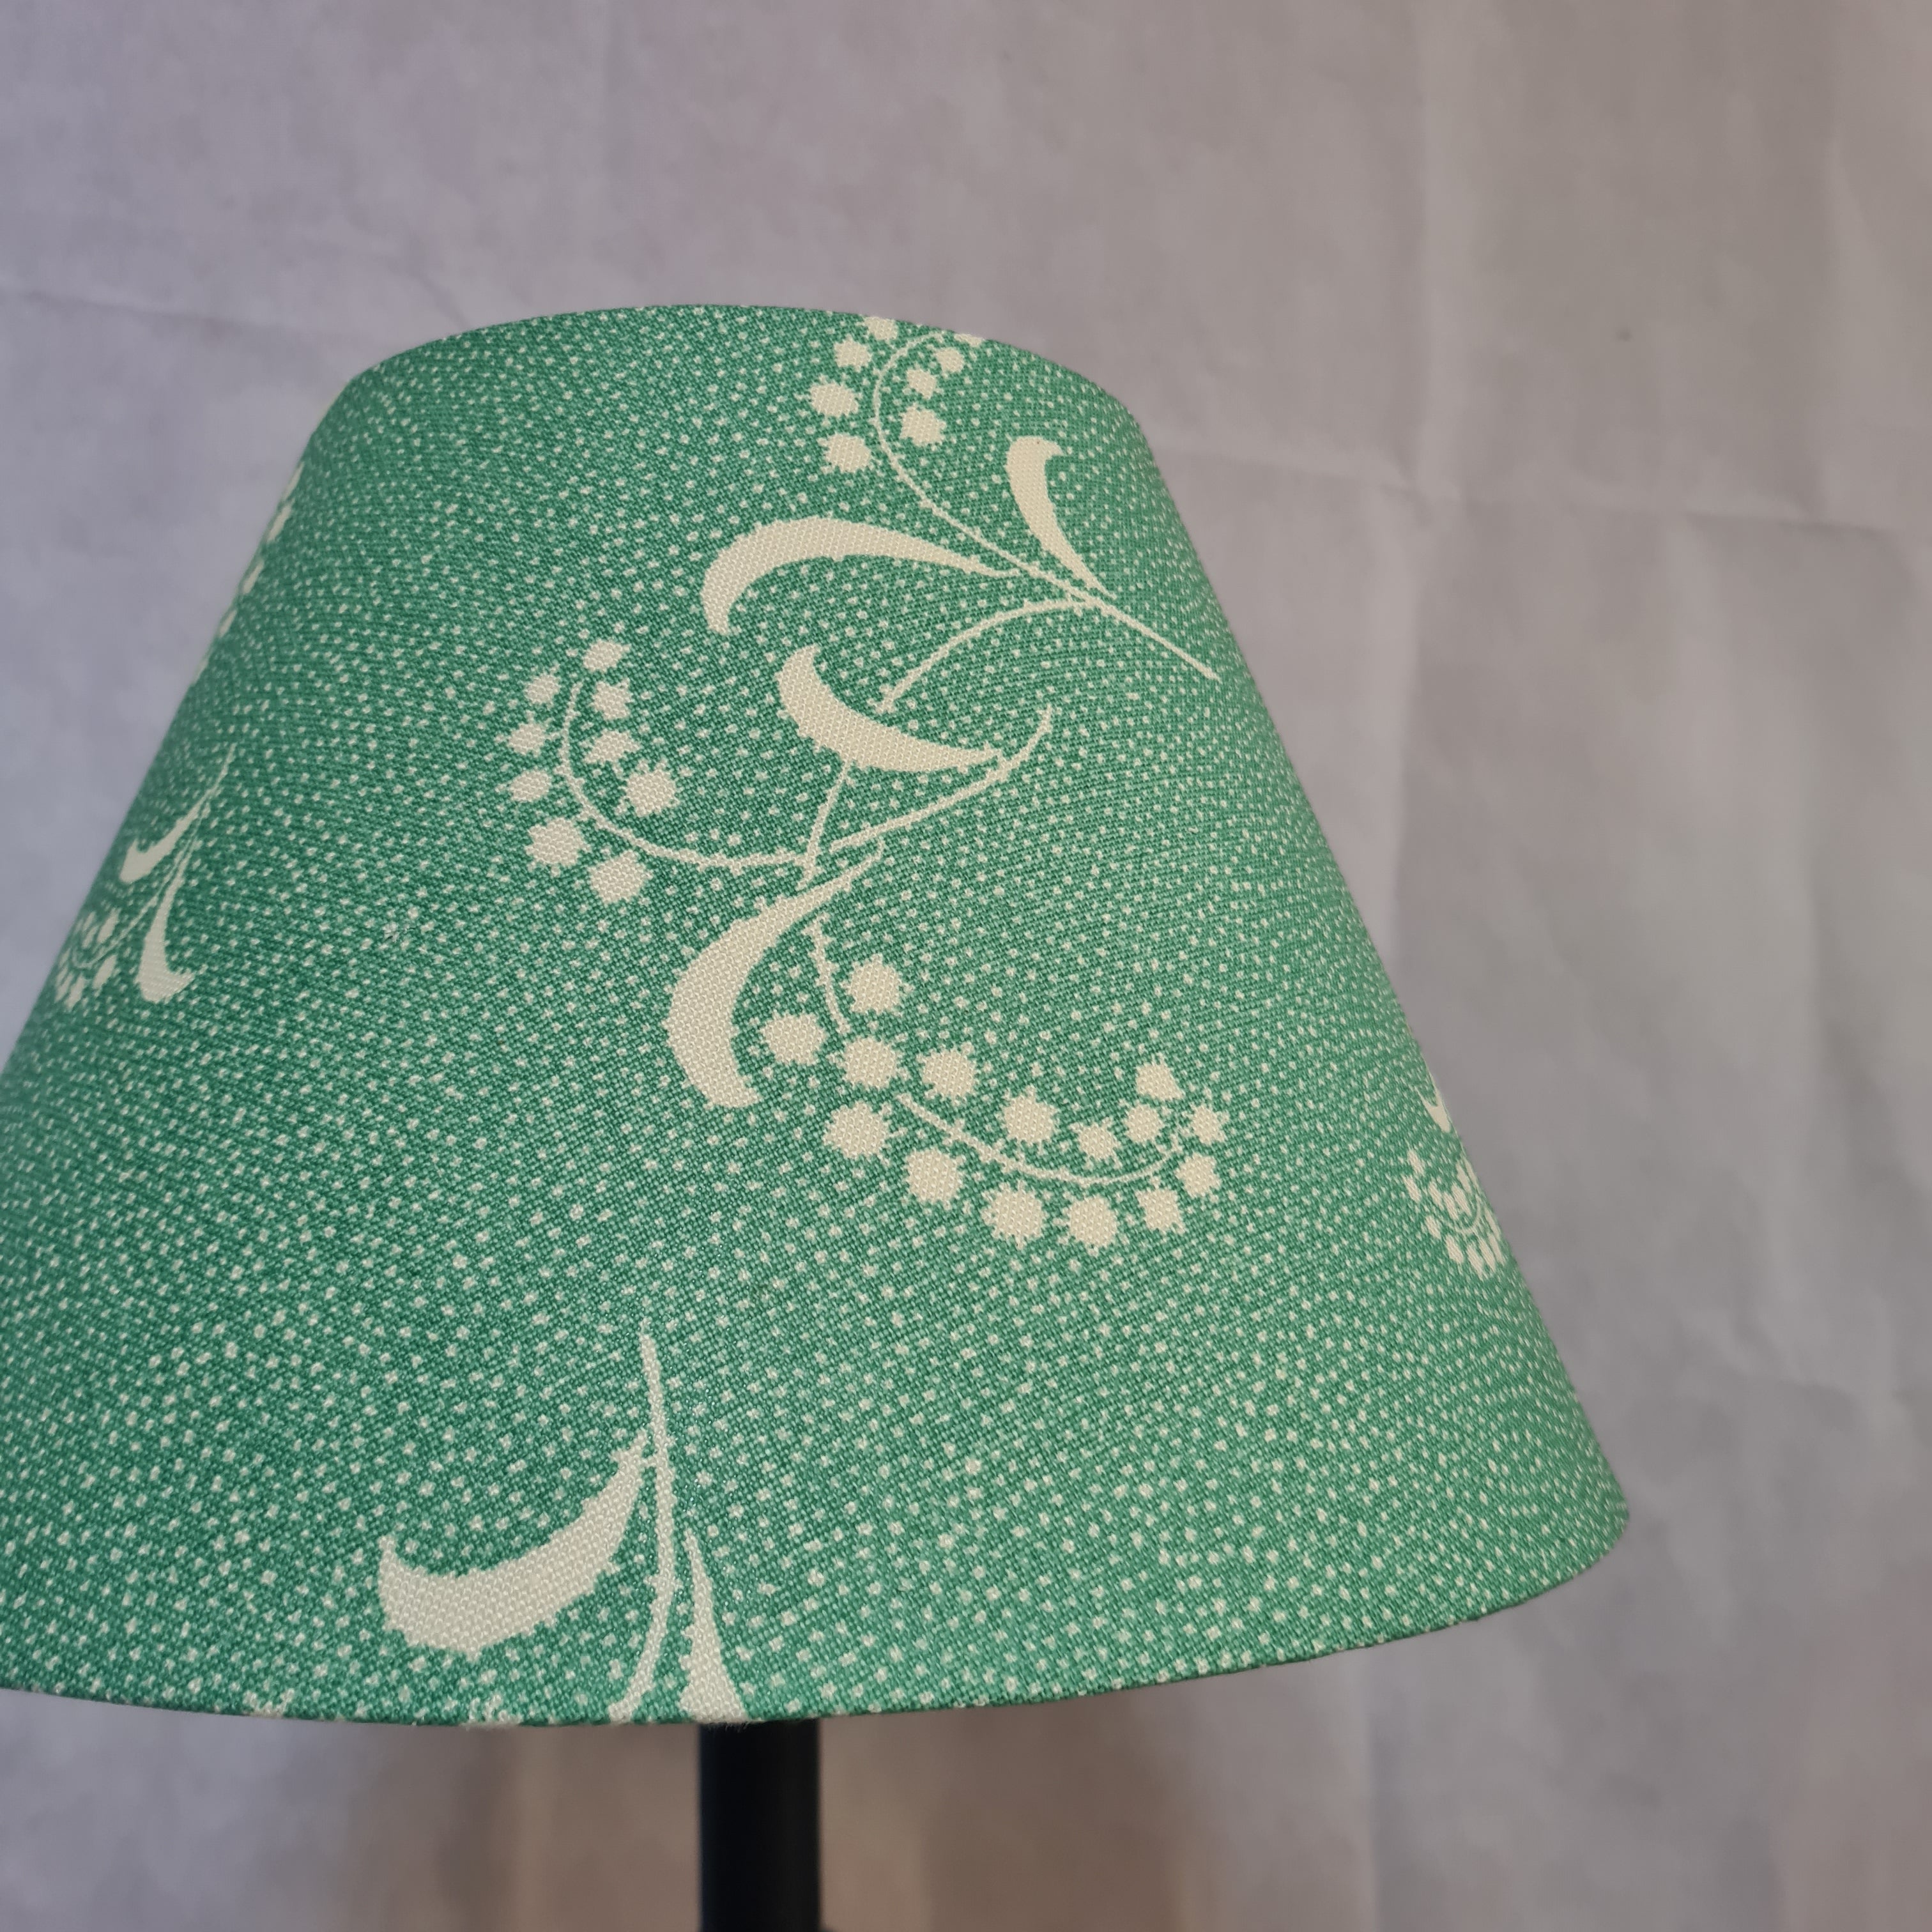 Floral Sprigs on Dots Lampshade